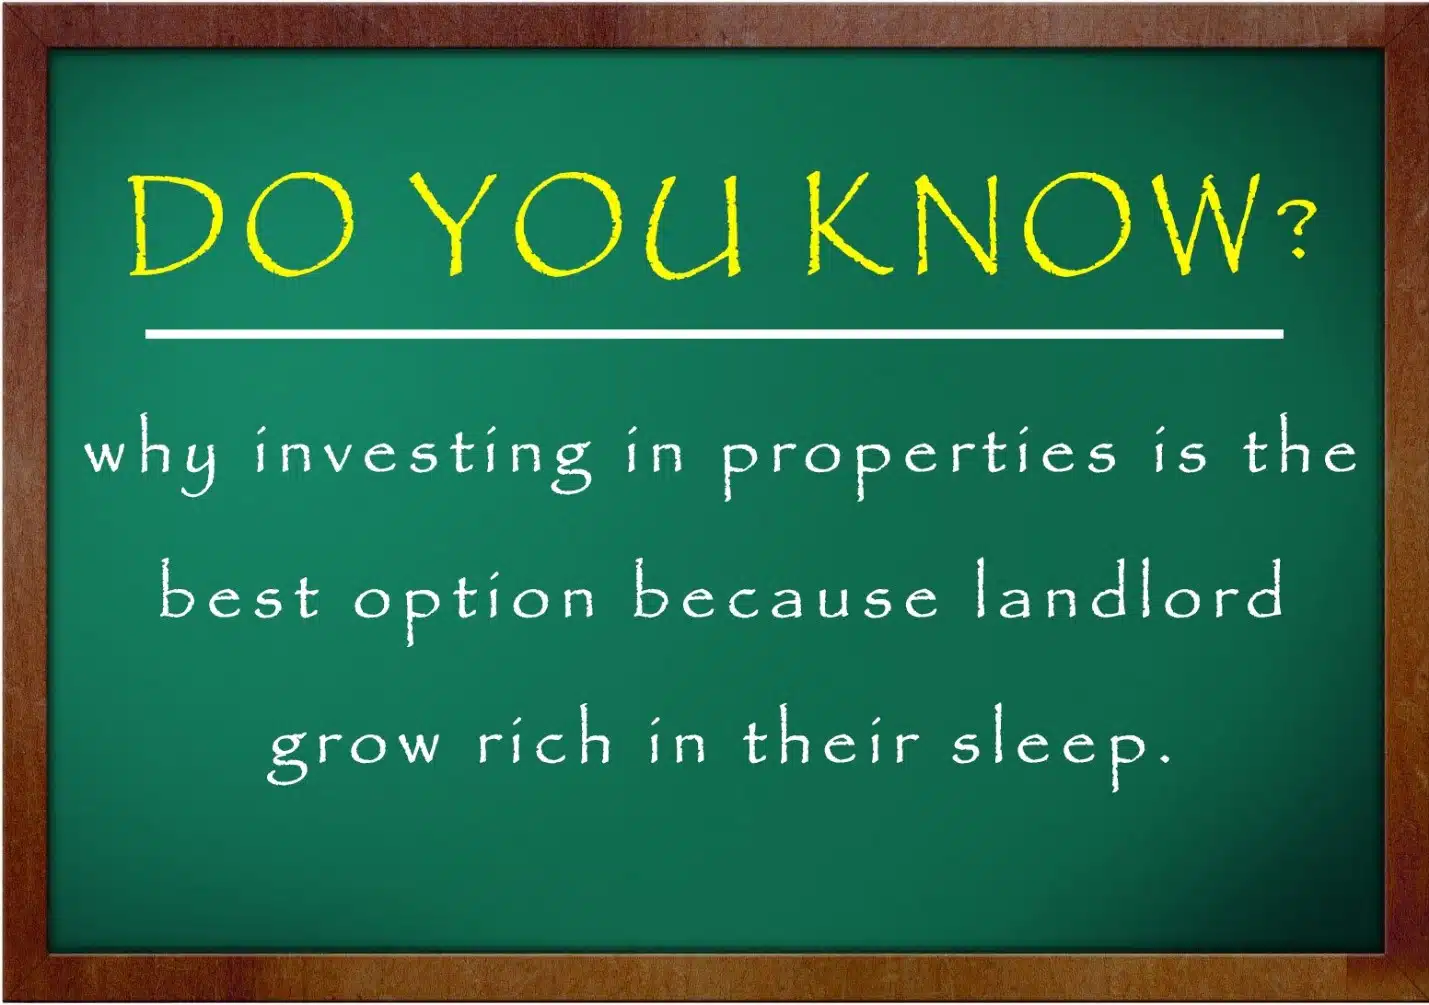 Why Do you invest in properties